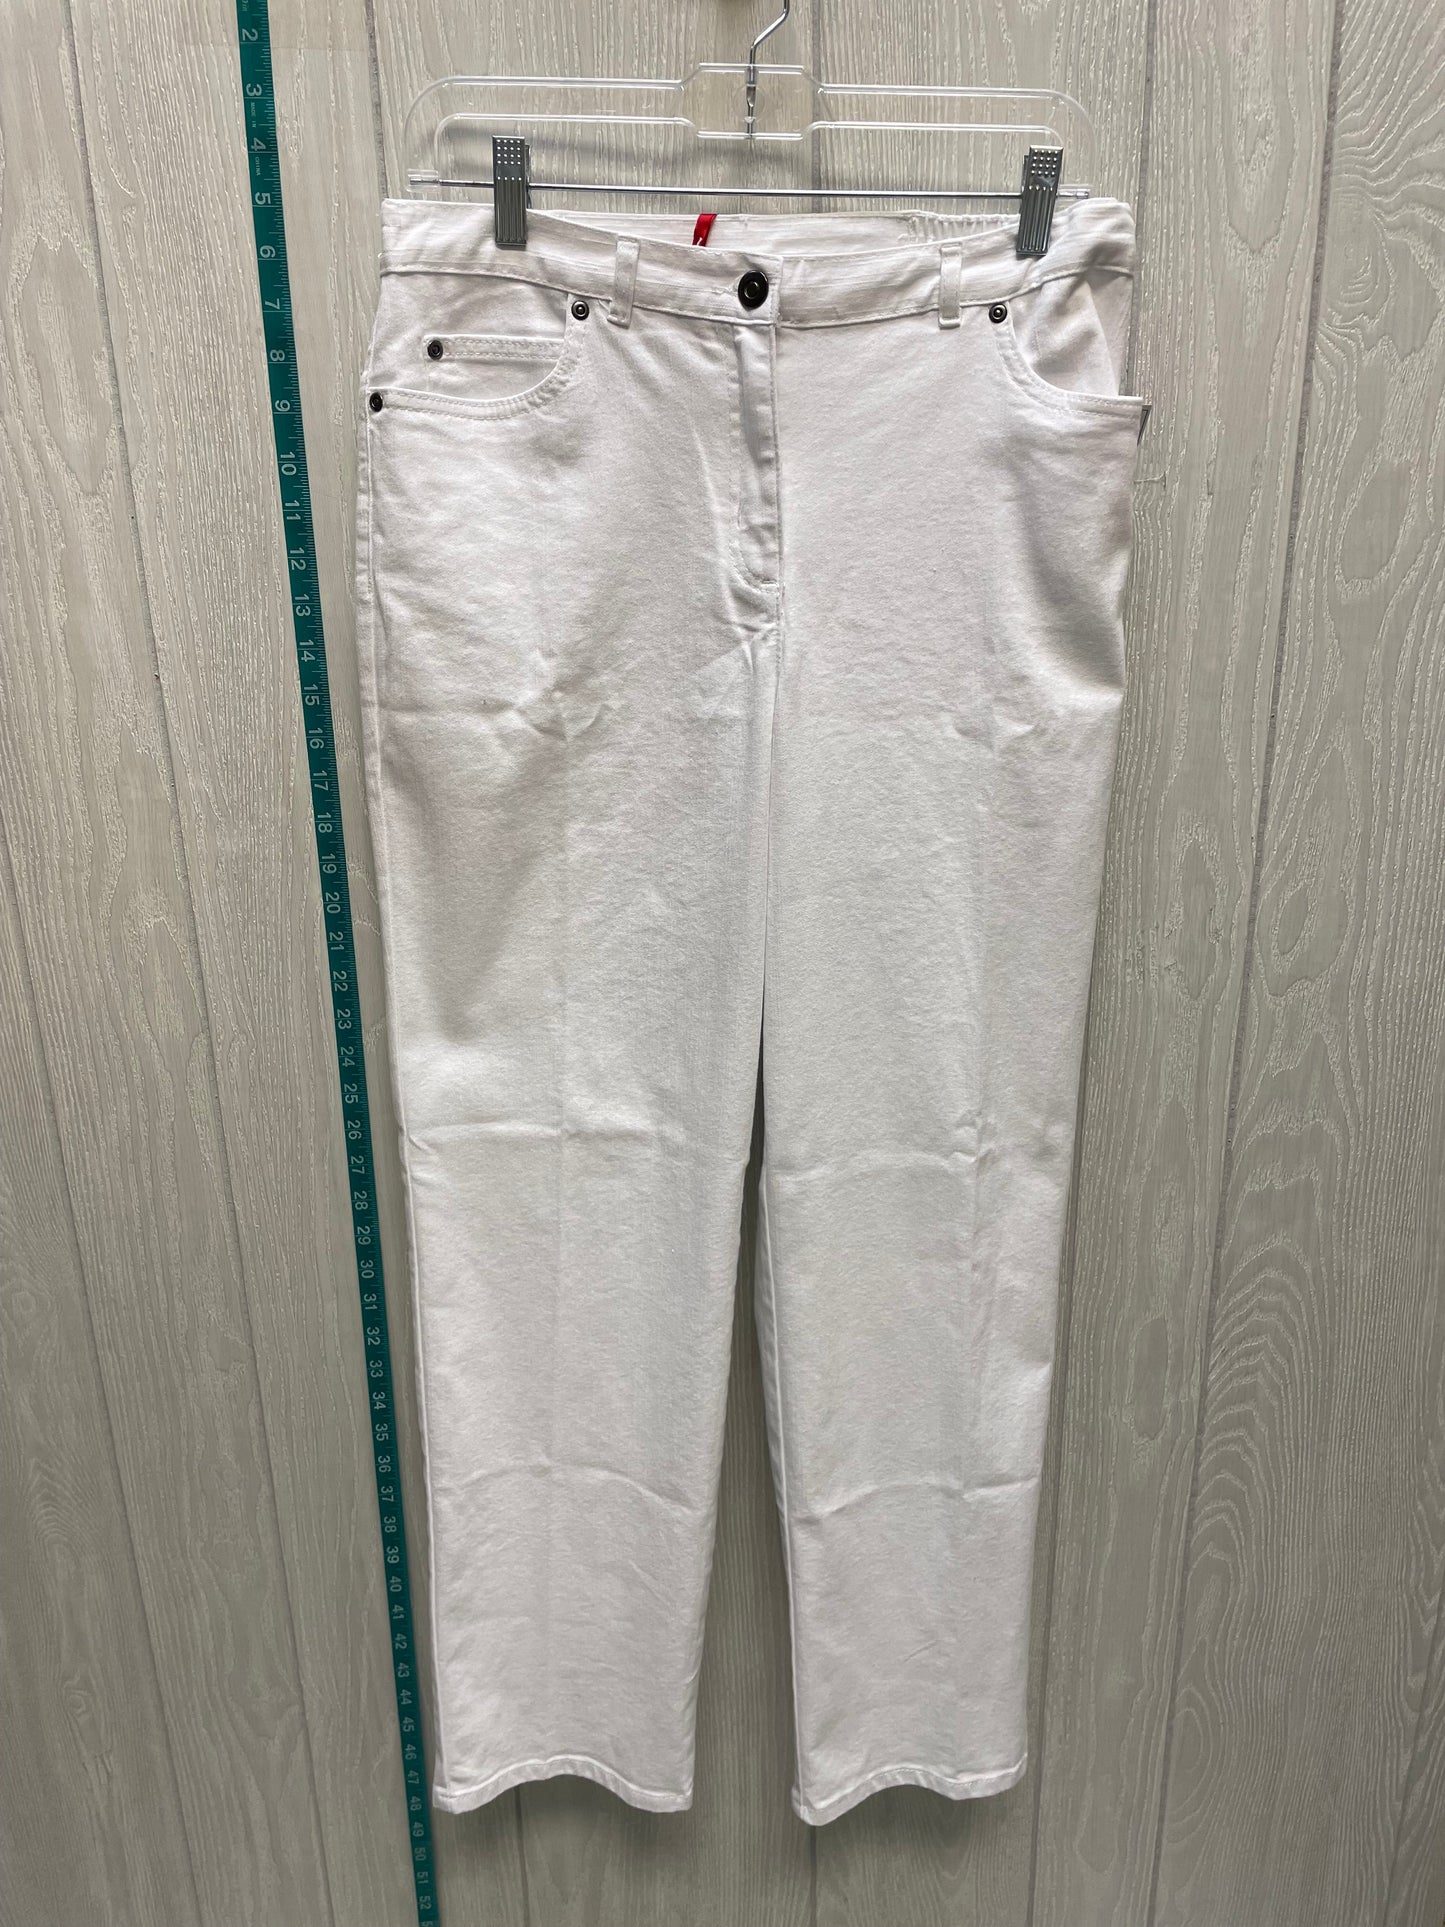 White Jeans Straight Ruby Rd, Size 8